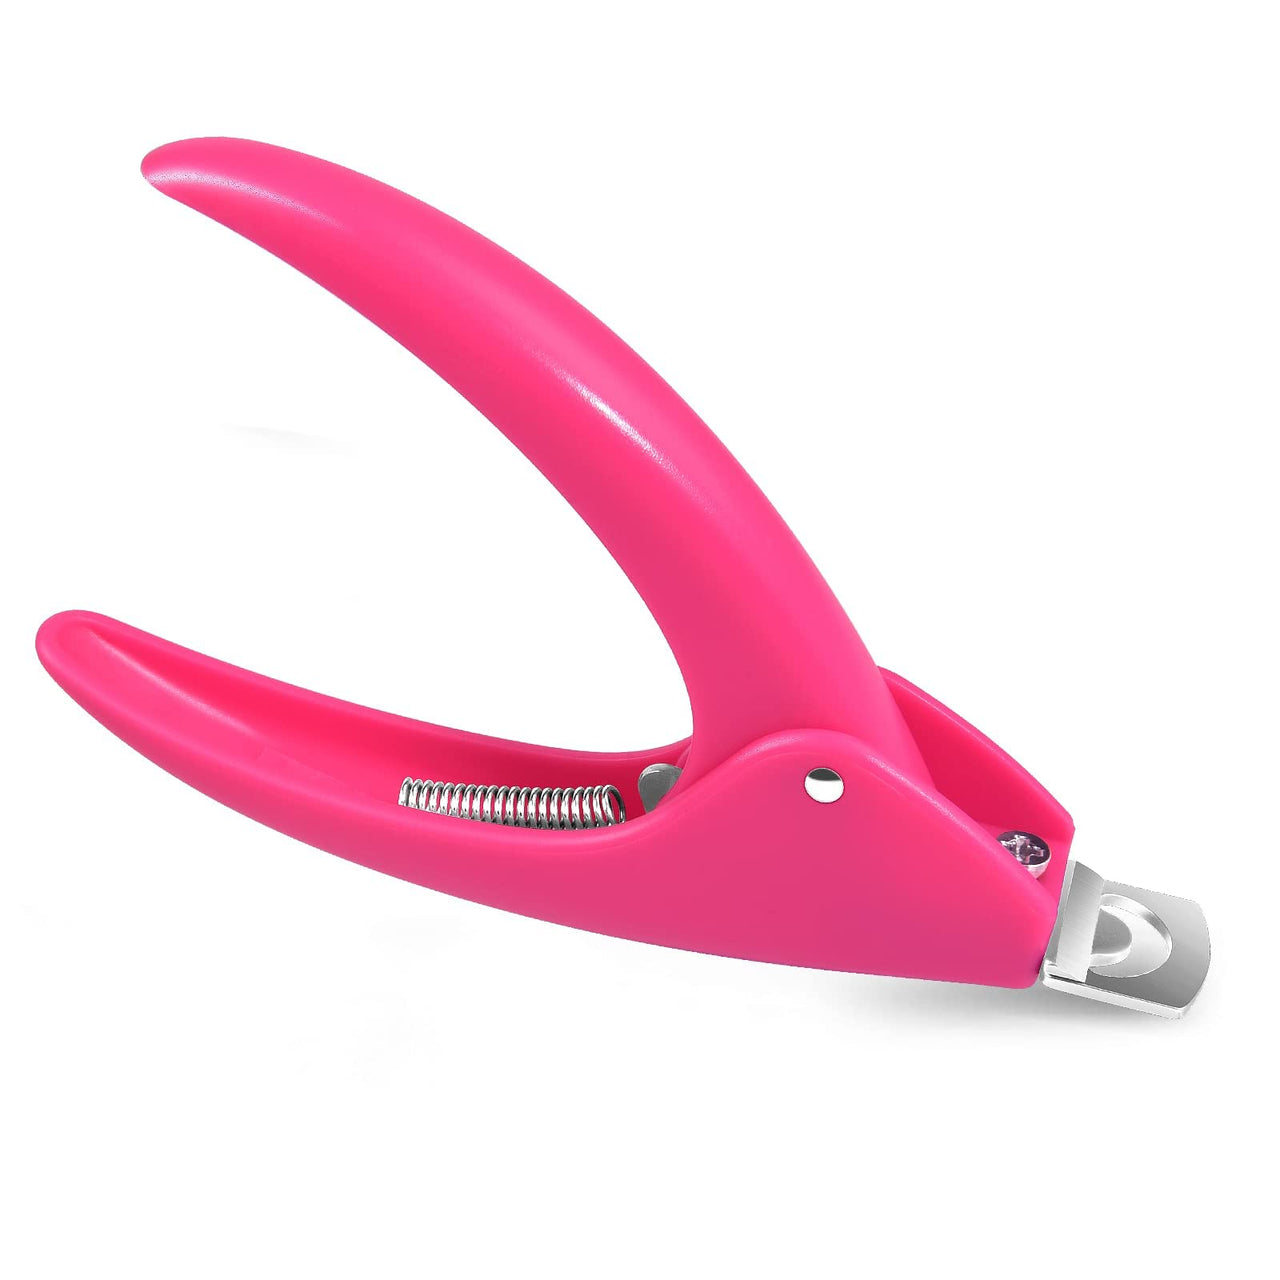 Acrylic Nail Tip Cutter silver/pink